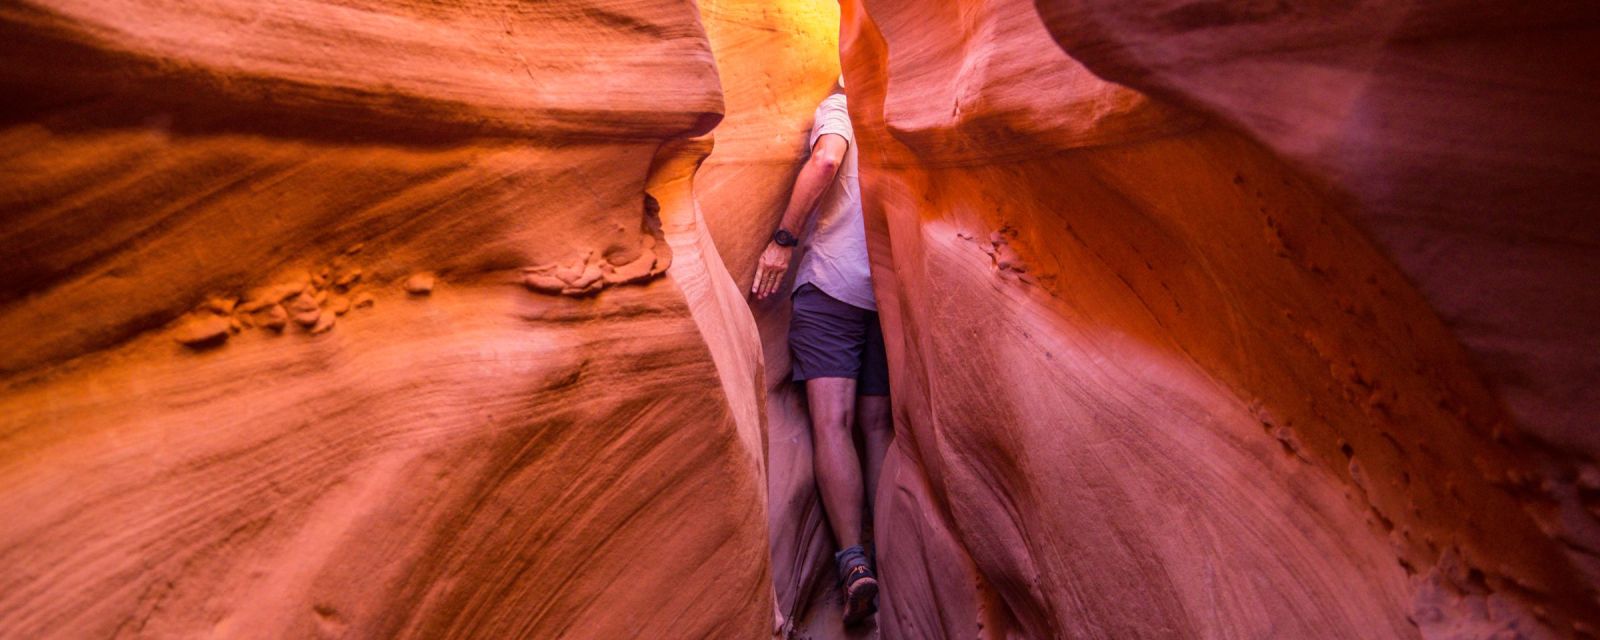 Peek-A-Boo and Spooky Slot Canyon - 9 Must Know Tips Before You Go